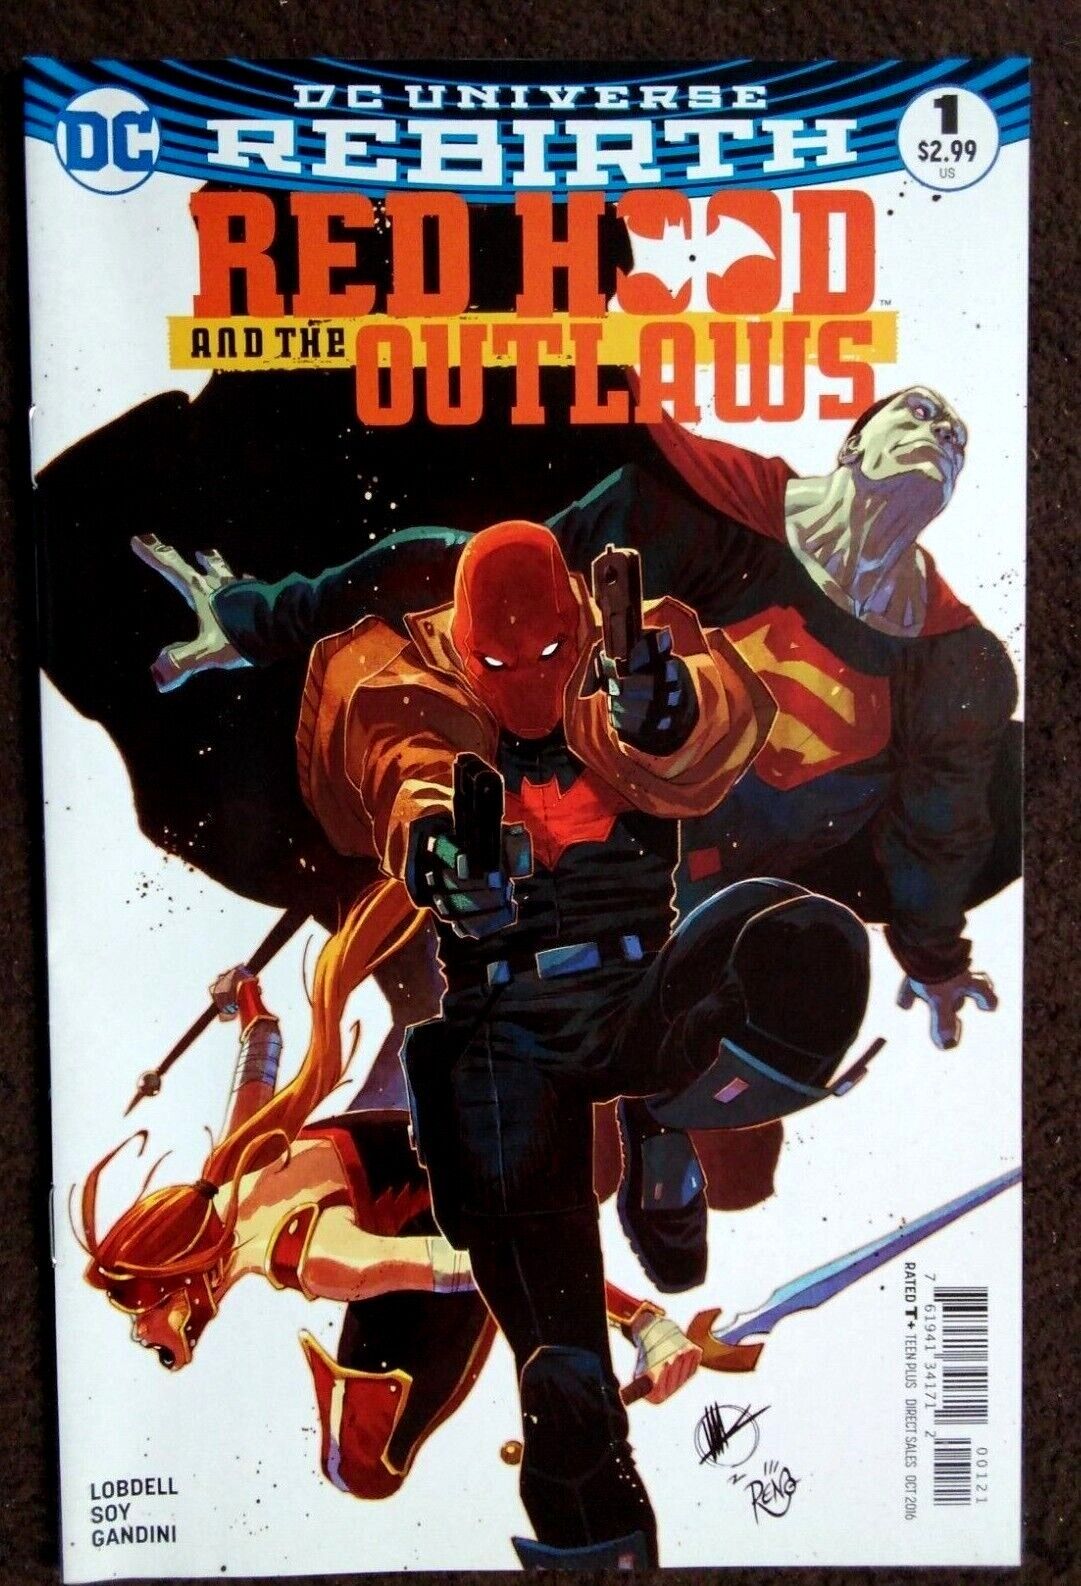 RED HOOD AND THE OUTLAWS #1-6 DC REBIRTH COMIC SERIES PICK CHOOSE YOUR COMIC